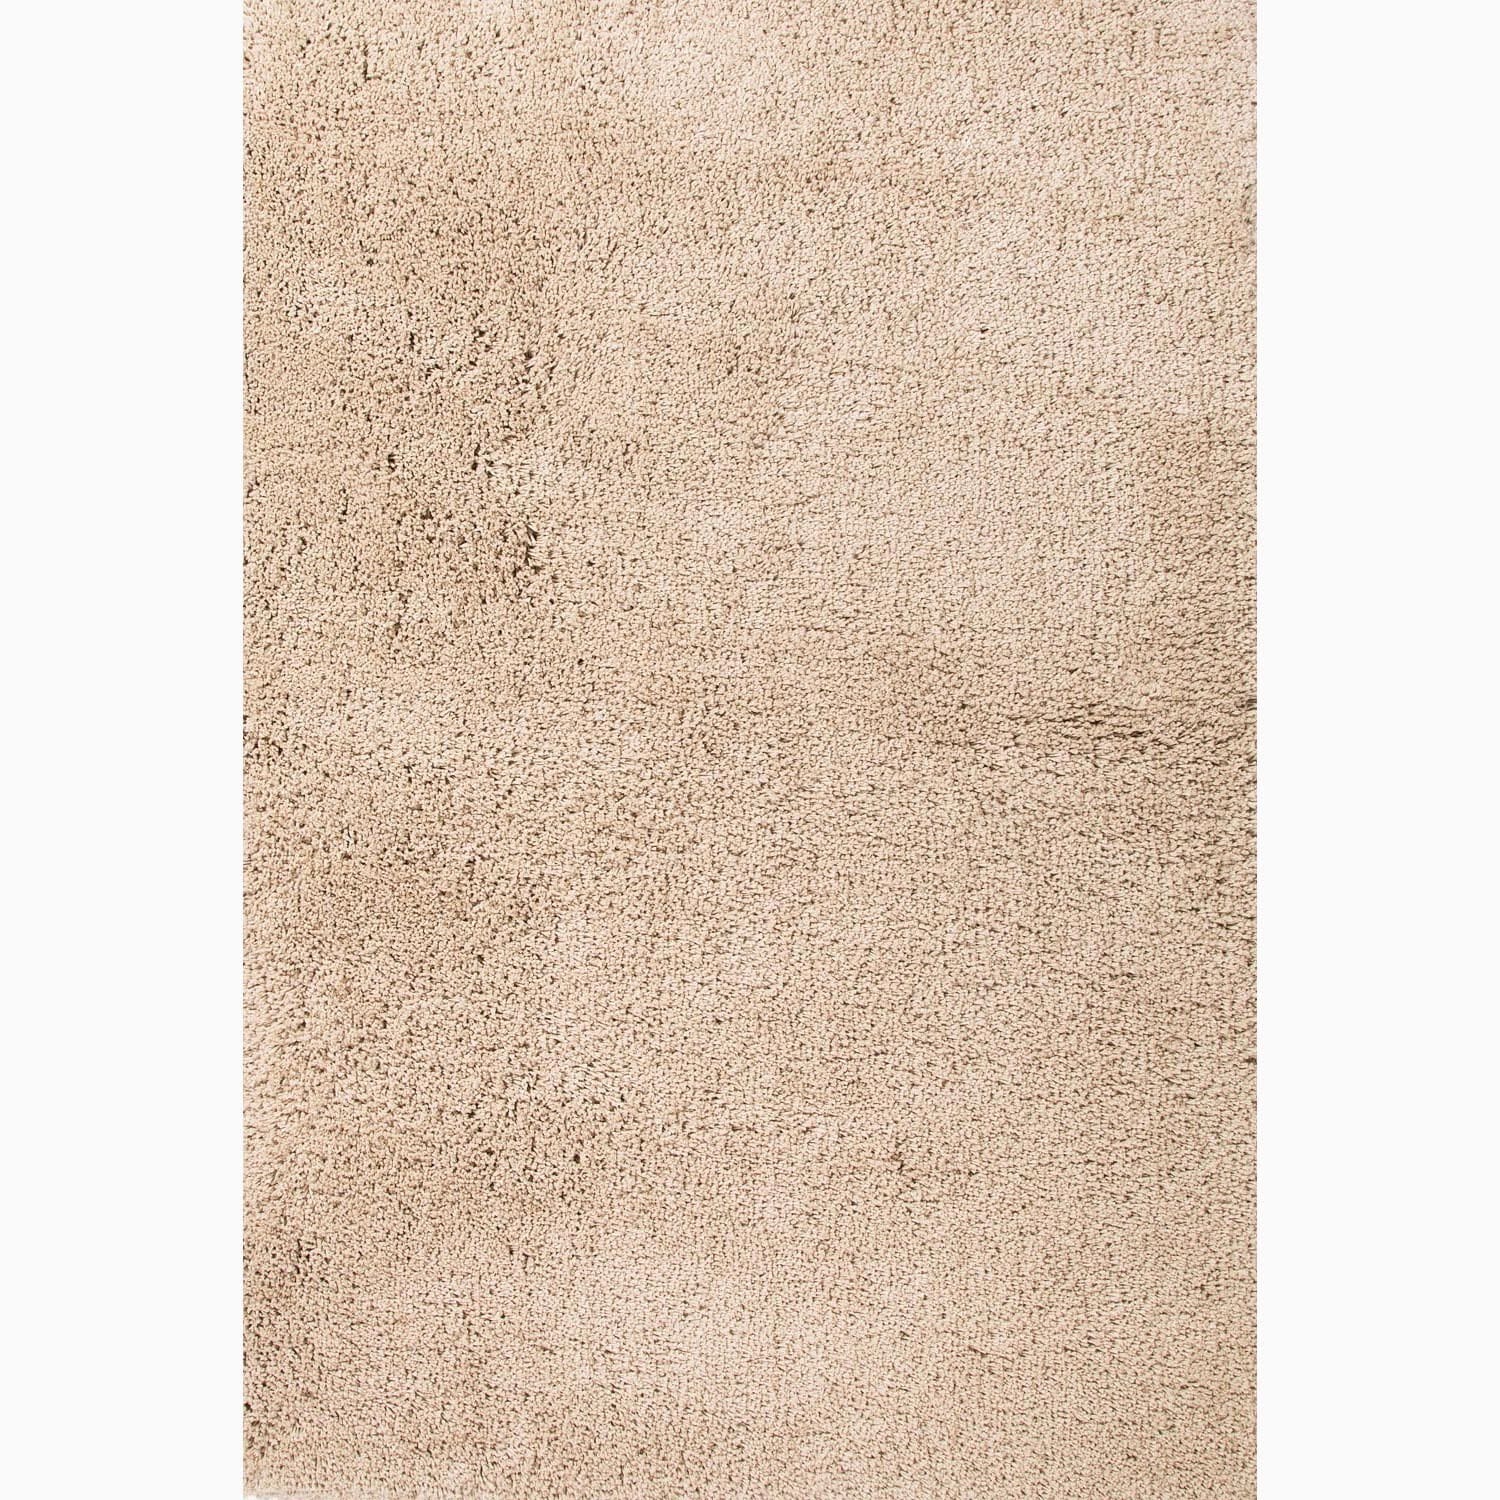 Handmade Solid Pattern Taupe/ Tan Polyester Rug (5 X 8)